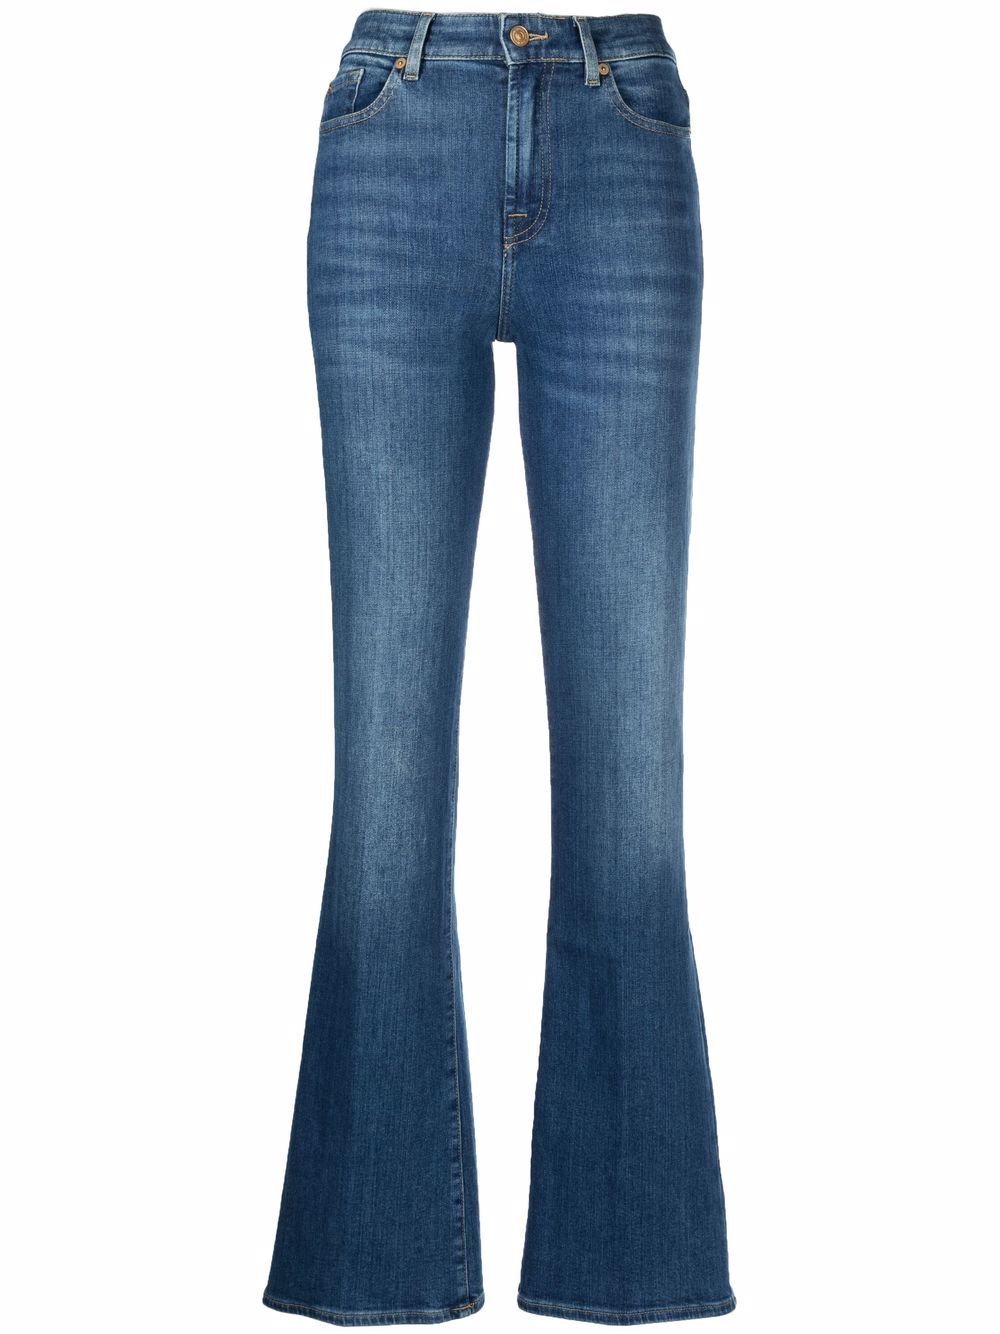 7 For All Mankind flared-cut Jeans - Farfetch